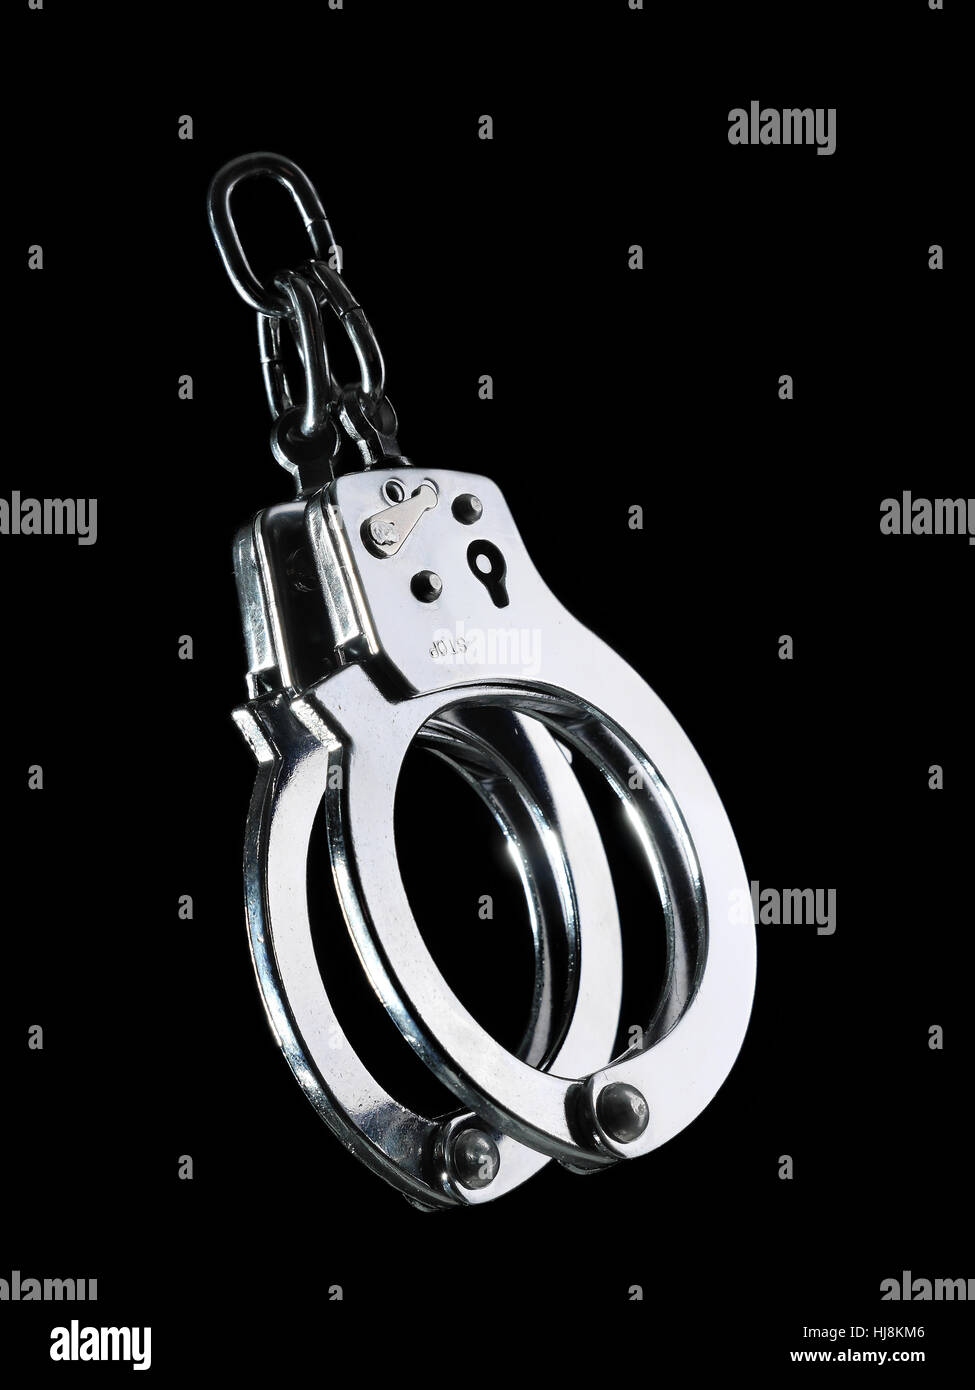 prison, handcuffs, arrest, imprison, security, safety, object, isolated, black, Stock Photo